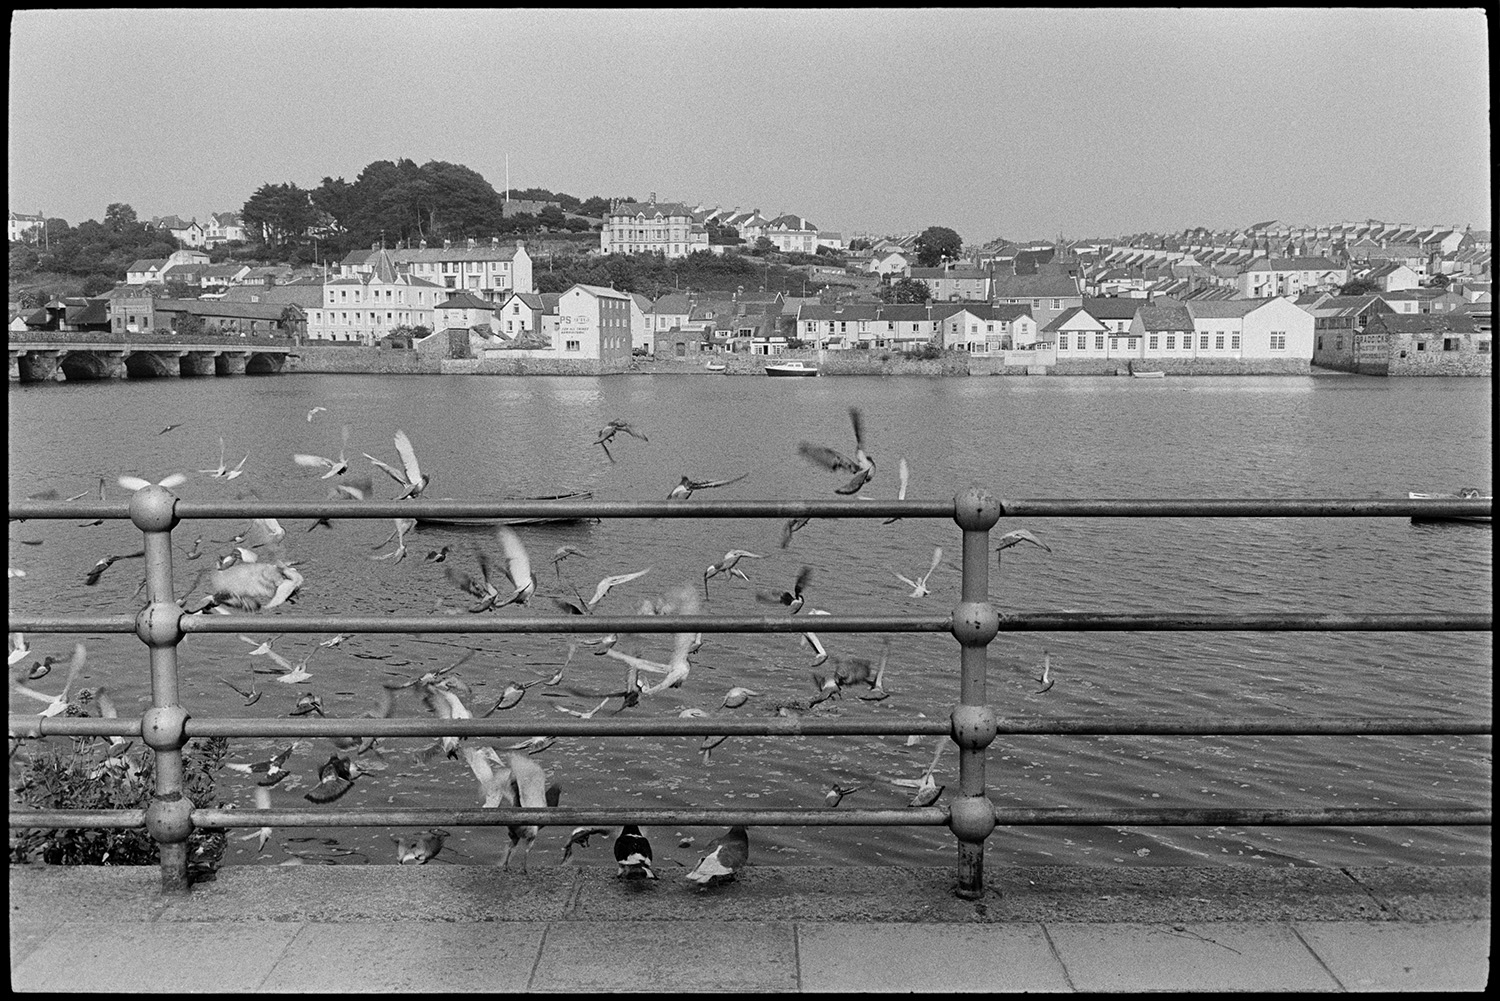 Flock of pigeons beside river, bridge behind. 
[A flock of pigeons by railings along the River Torridge at Bideford. Bideford Bridge, also known as Bideford Long Bridge and house on the opposite side of the river can be seen in the background.]